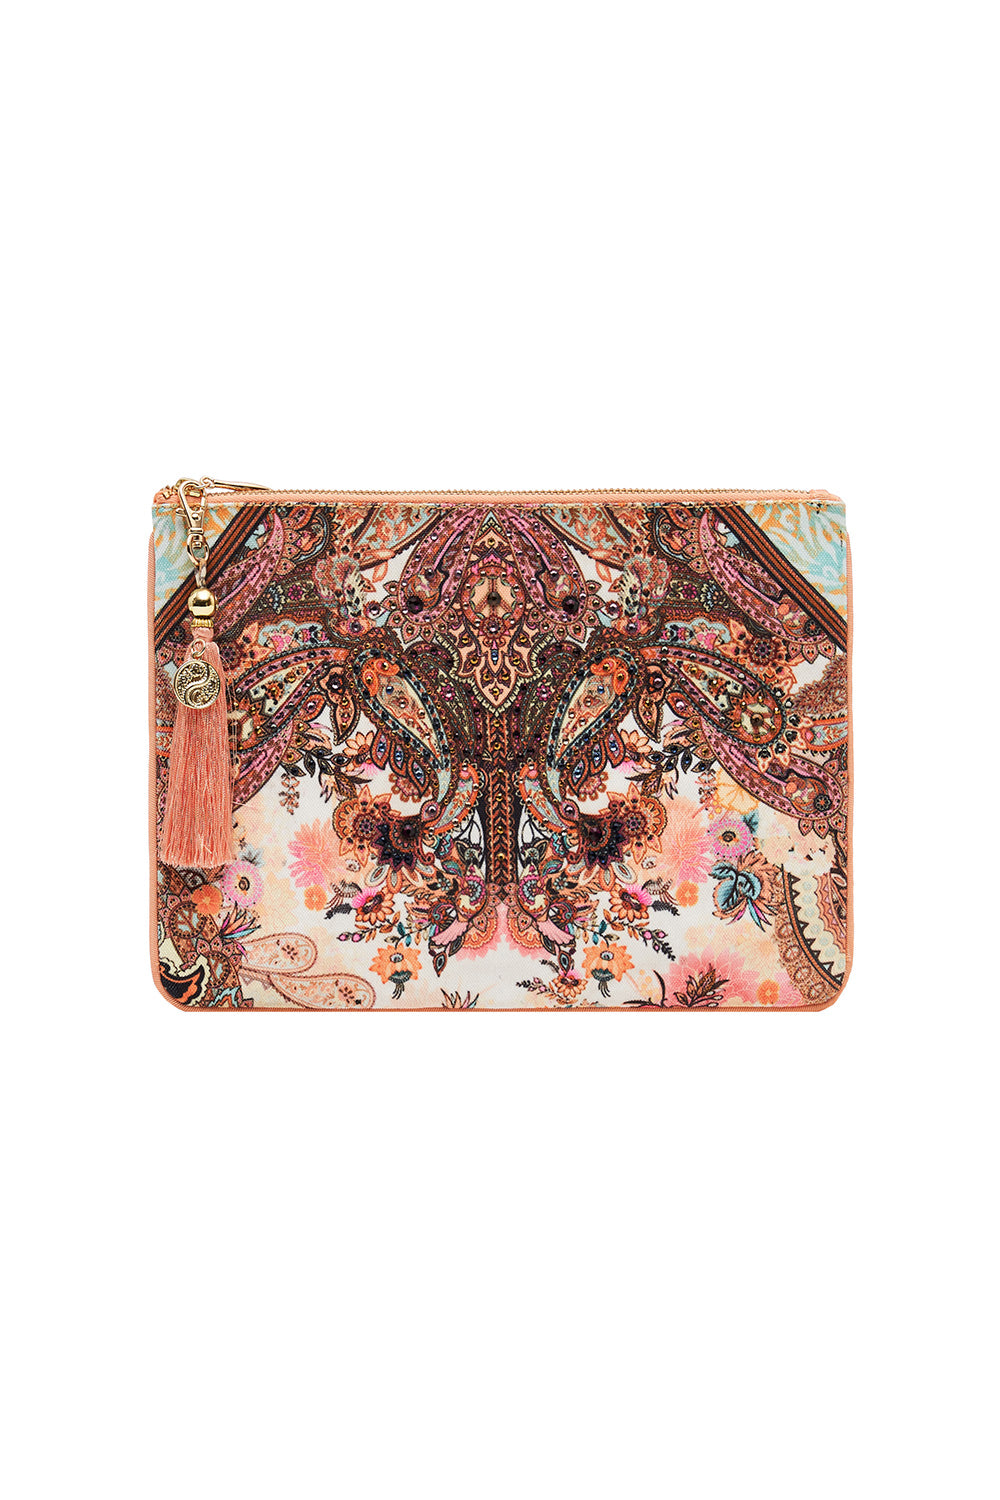 SMALL CANVAS CLUTCH CARNABY DISCO